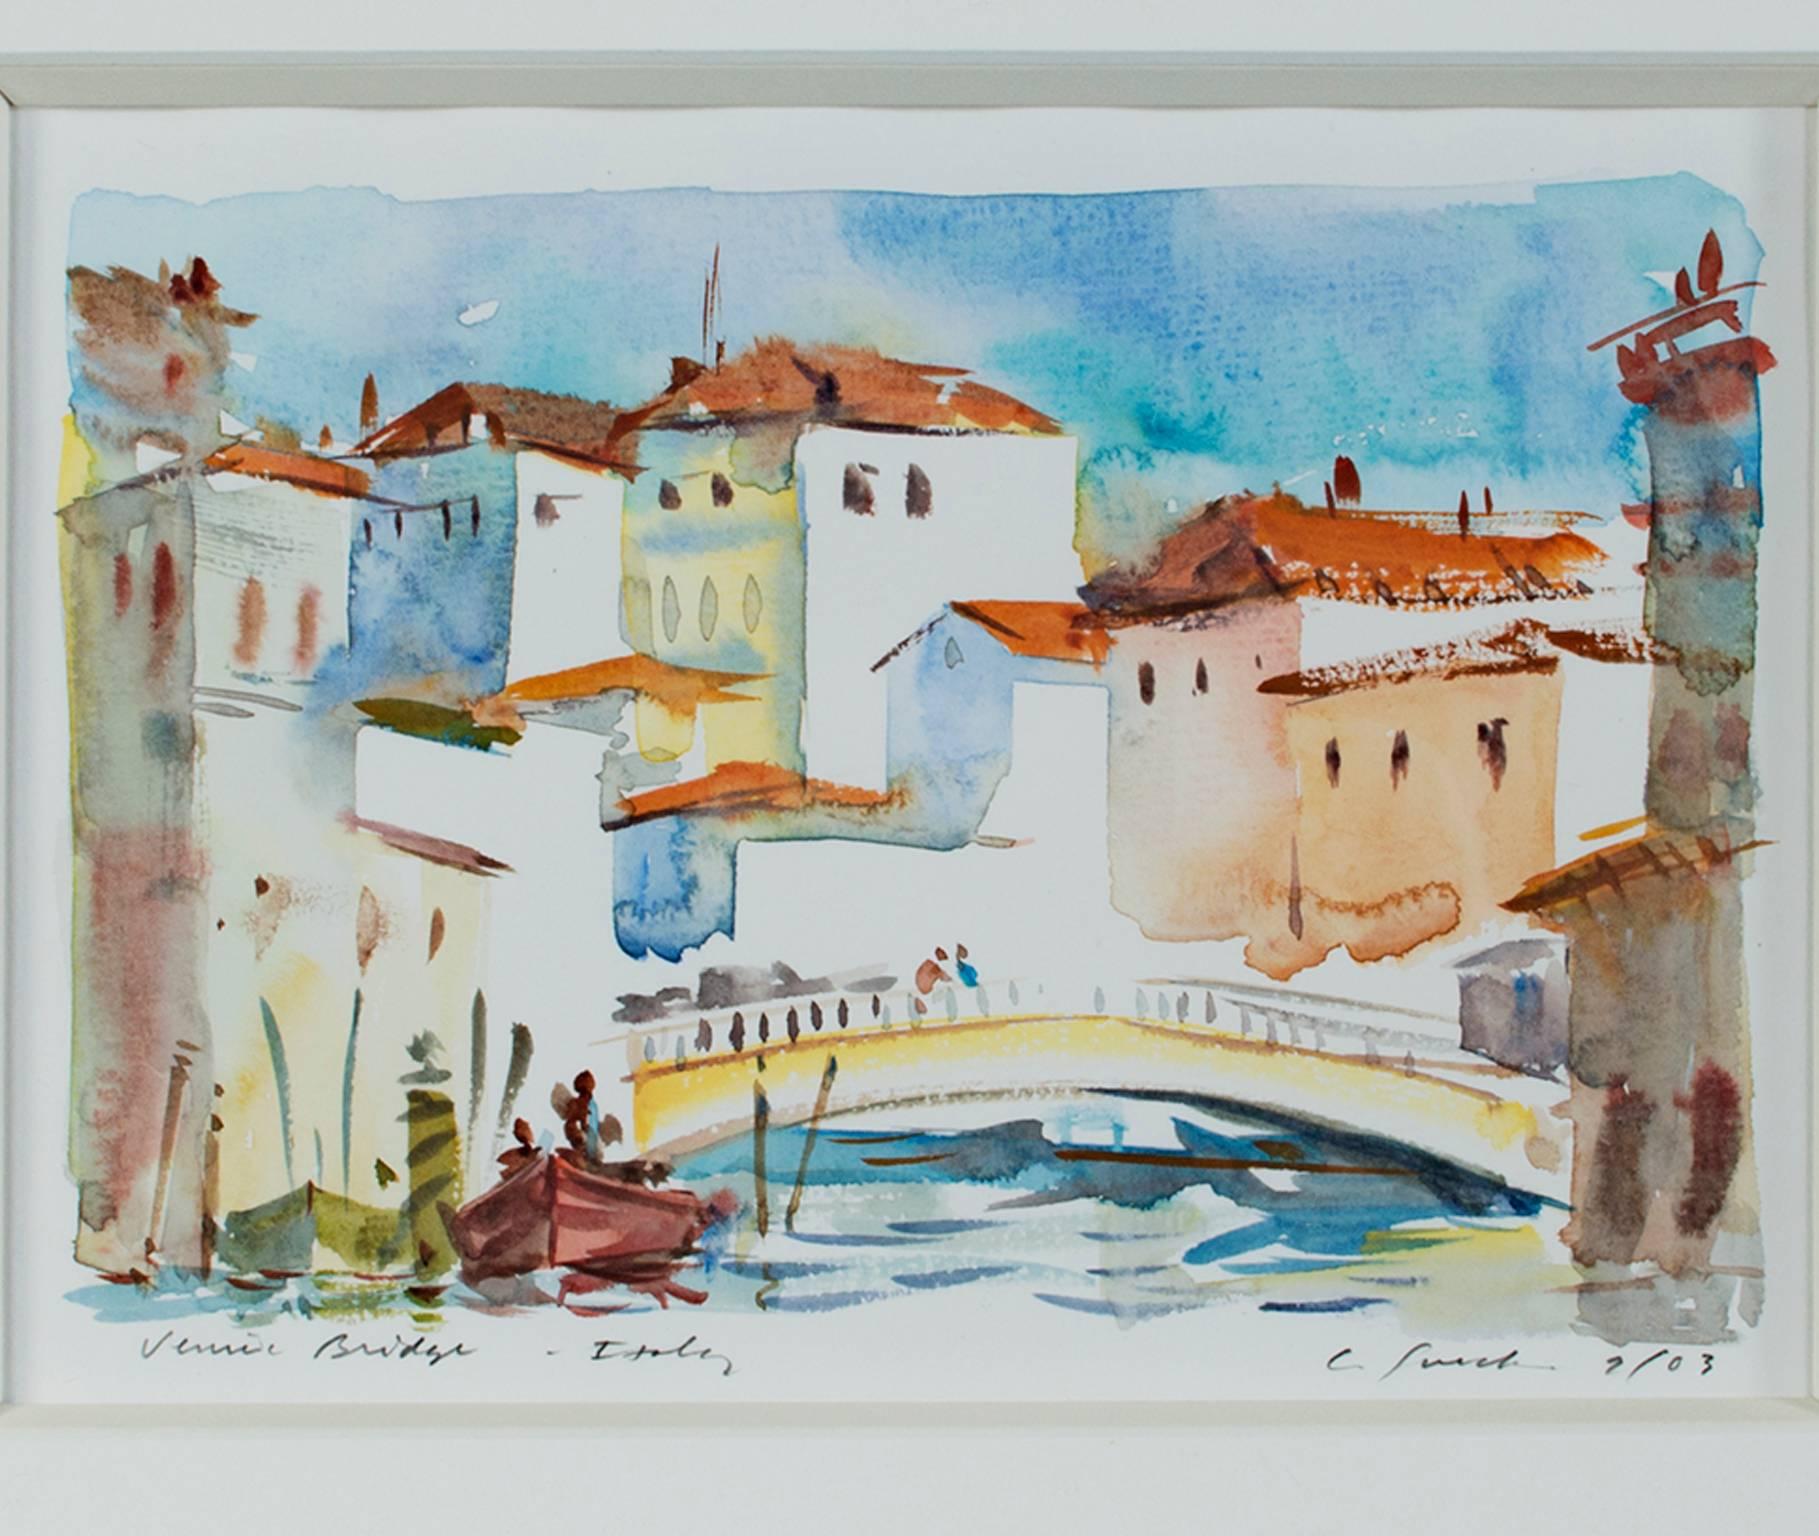 "Venice Bridge - Italy" is an original watercolor on Holbein watercolor paper by Craig Lueck. These petite watercolors that make up Lueck's portfolio serve as windows into the artist's world. Scenery from his travels to Colorado and Italy are